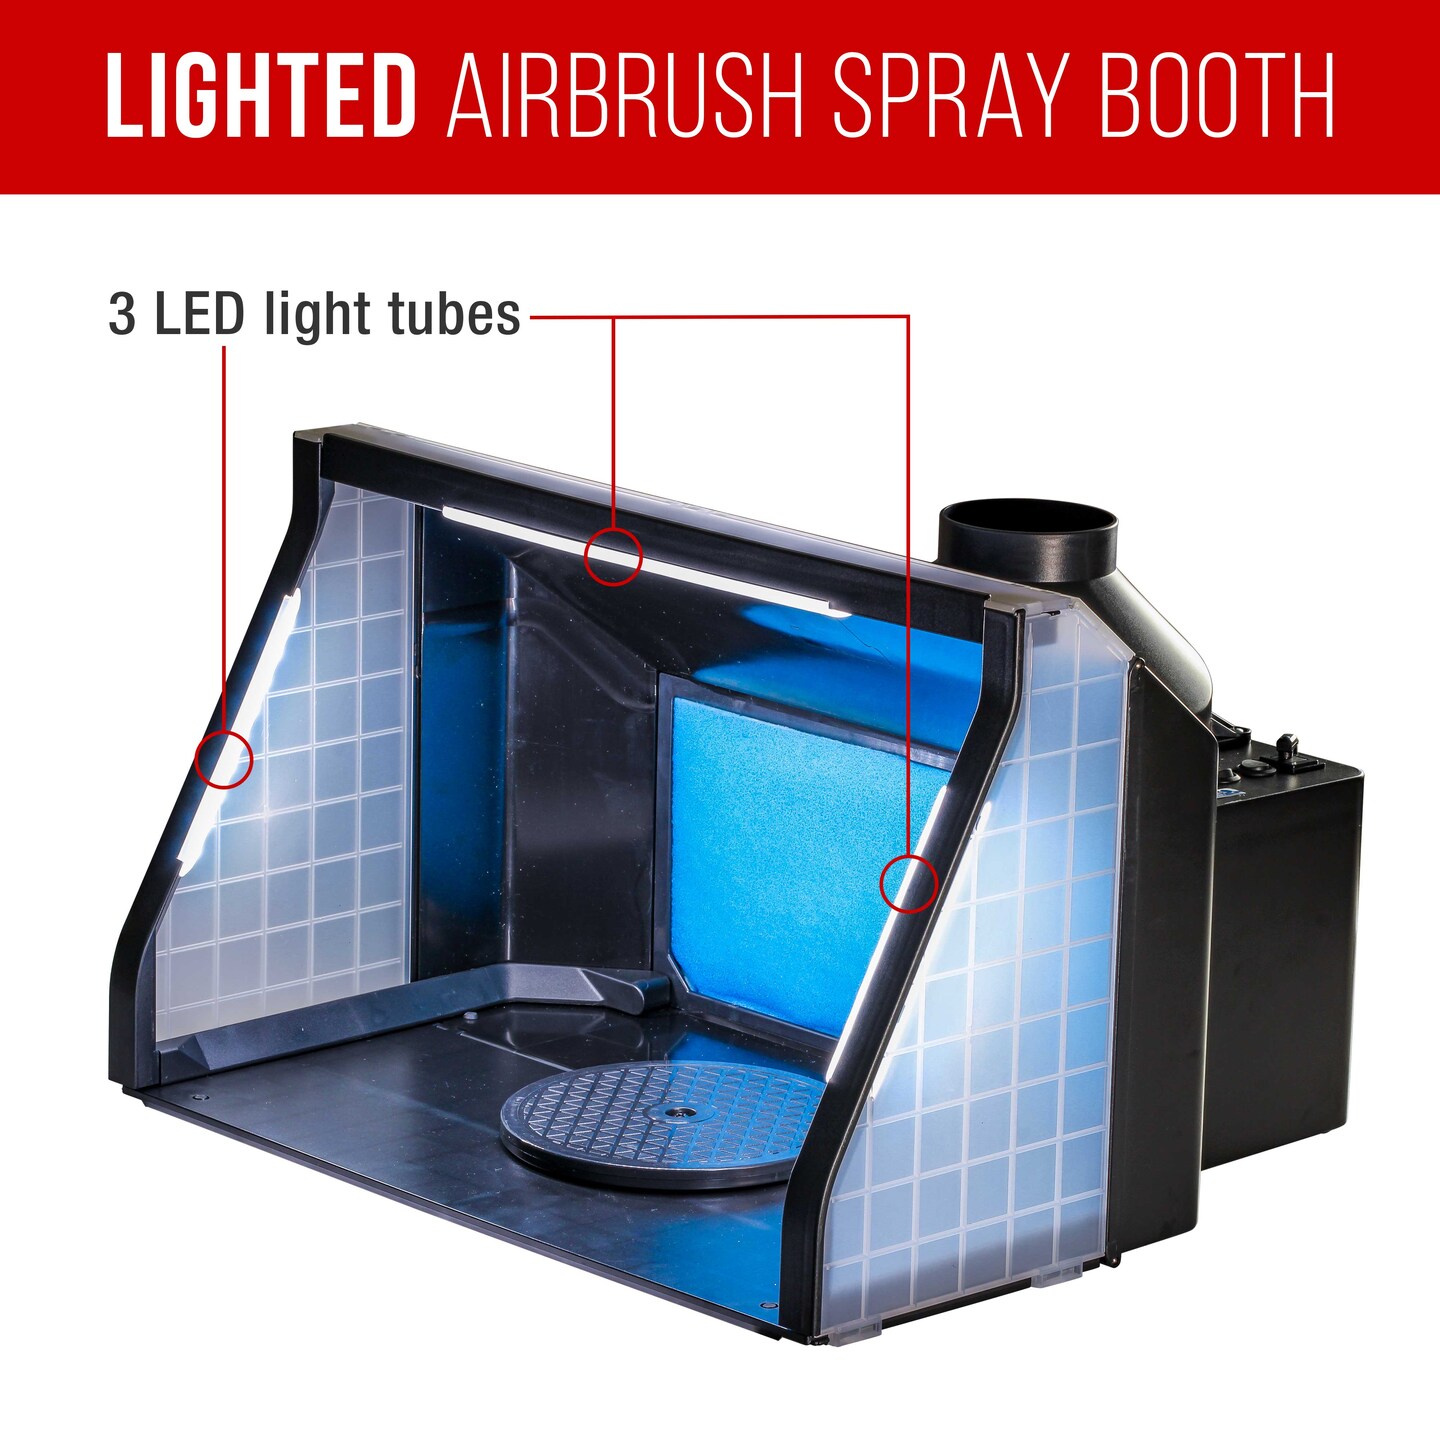 Master Portable Hobby Airbrush Spray Booth Kit with LED Lights